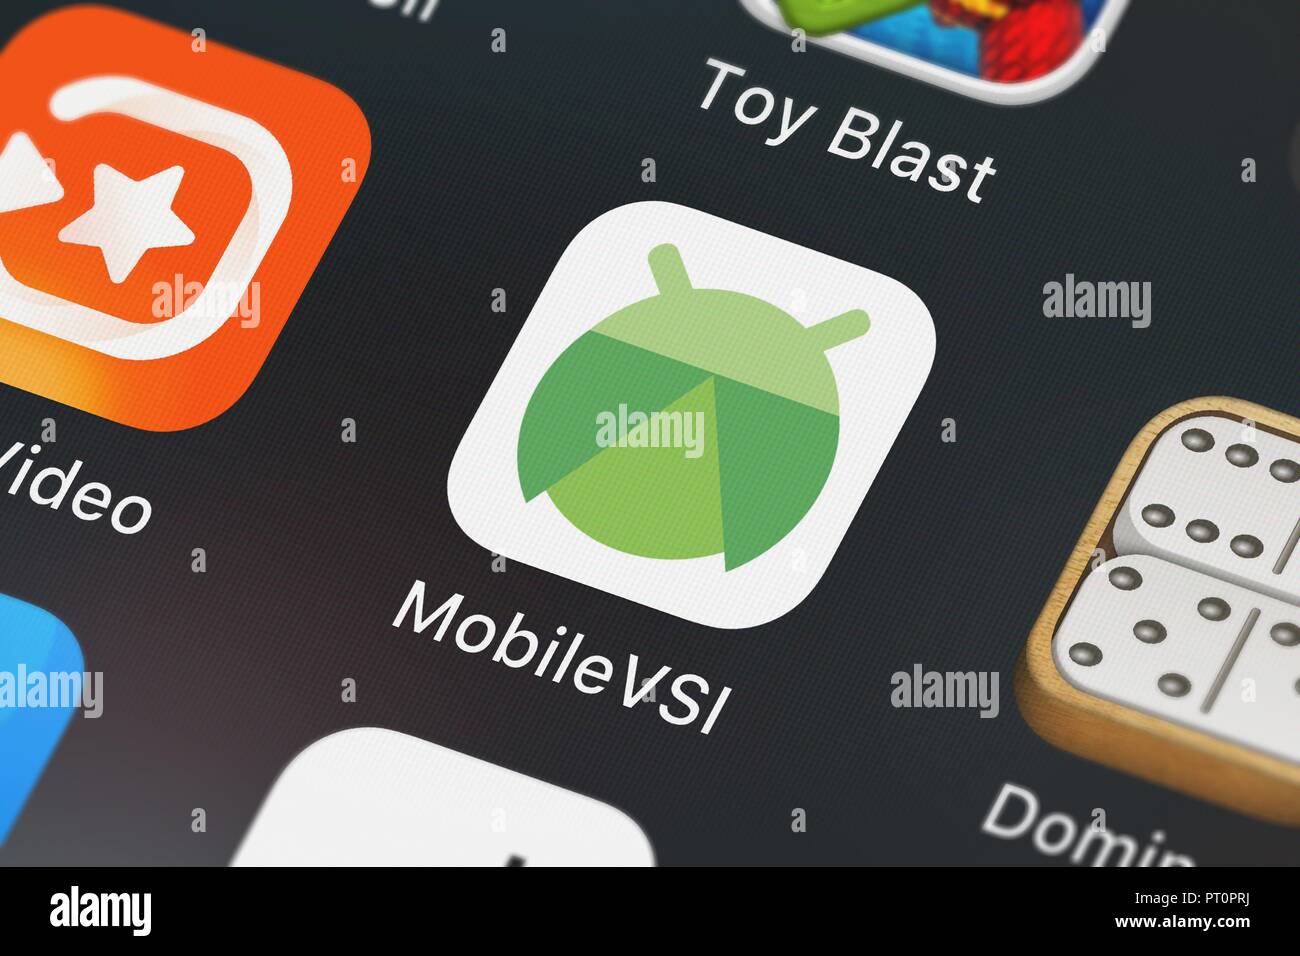 London, United Kingdom - October 05, 2018: Close-up shot of the MobileVSI application icon from Google, Inc. on an iPhone. Stock Photo